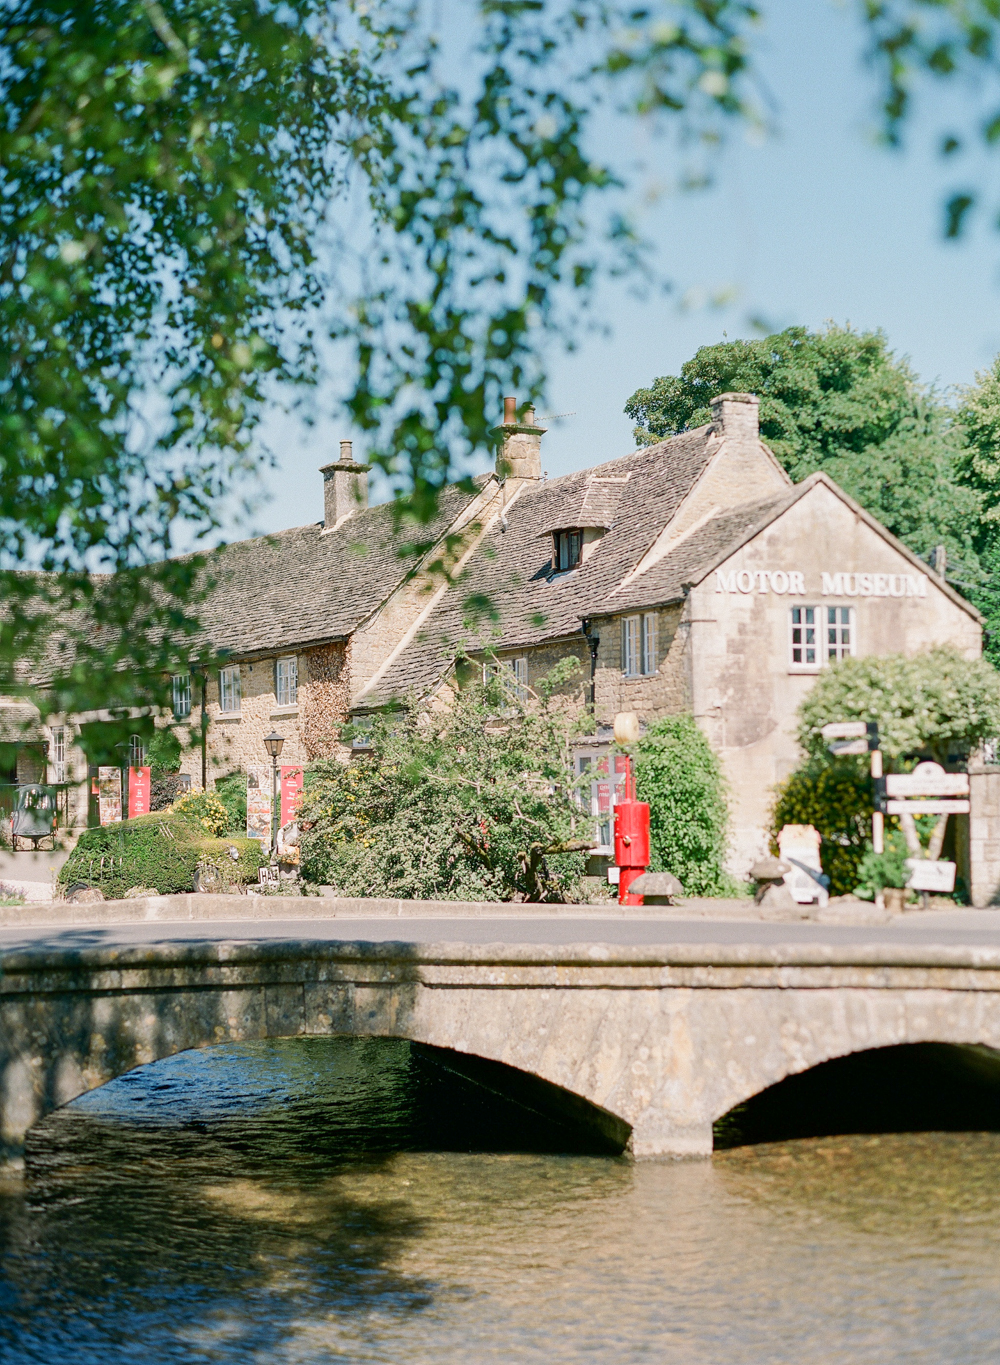 Cotswolds Wedding Photographer | England Wedding Photography | Cotswolds Travel Guide | Molly Carr Photography | Bourton-on-the-Water, England